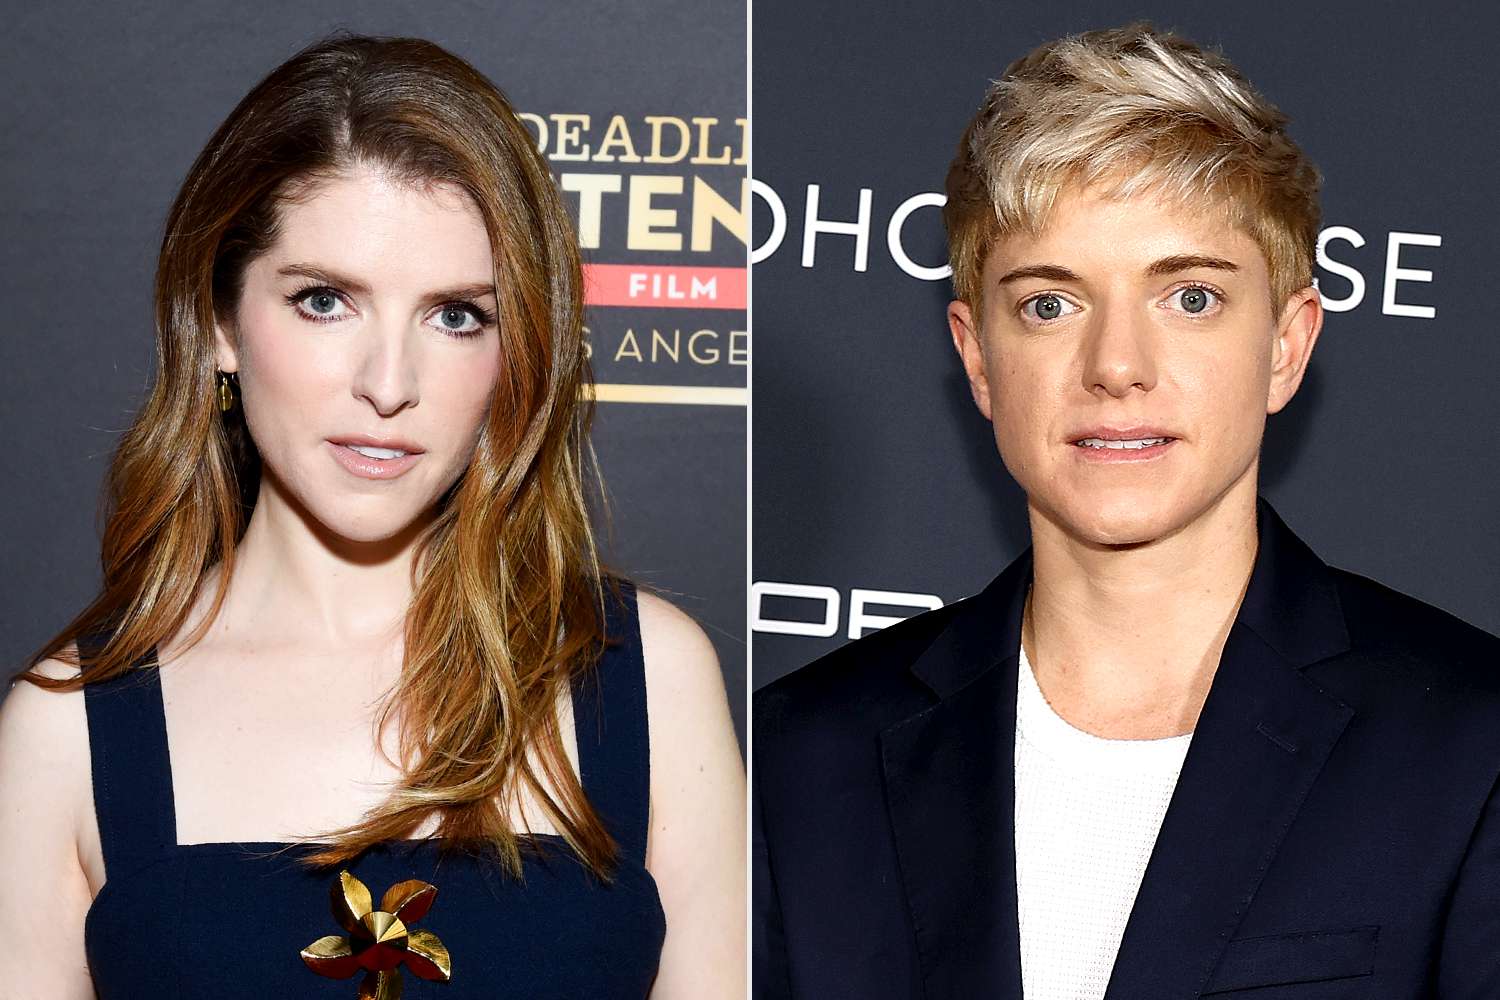 anna kendrick and mae martin attend “the traitors” immersive experience with season 2 cast